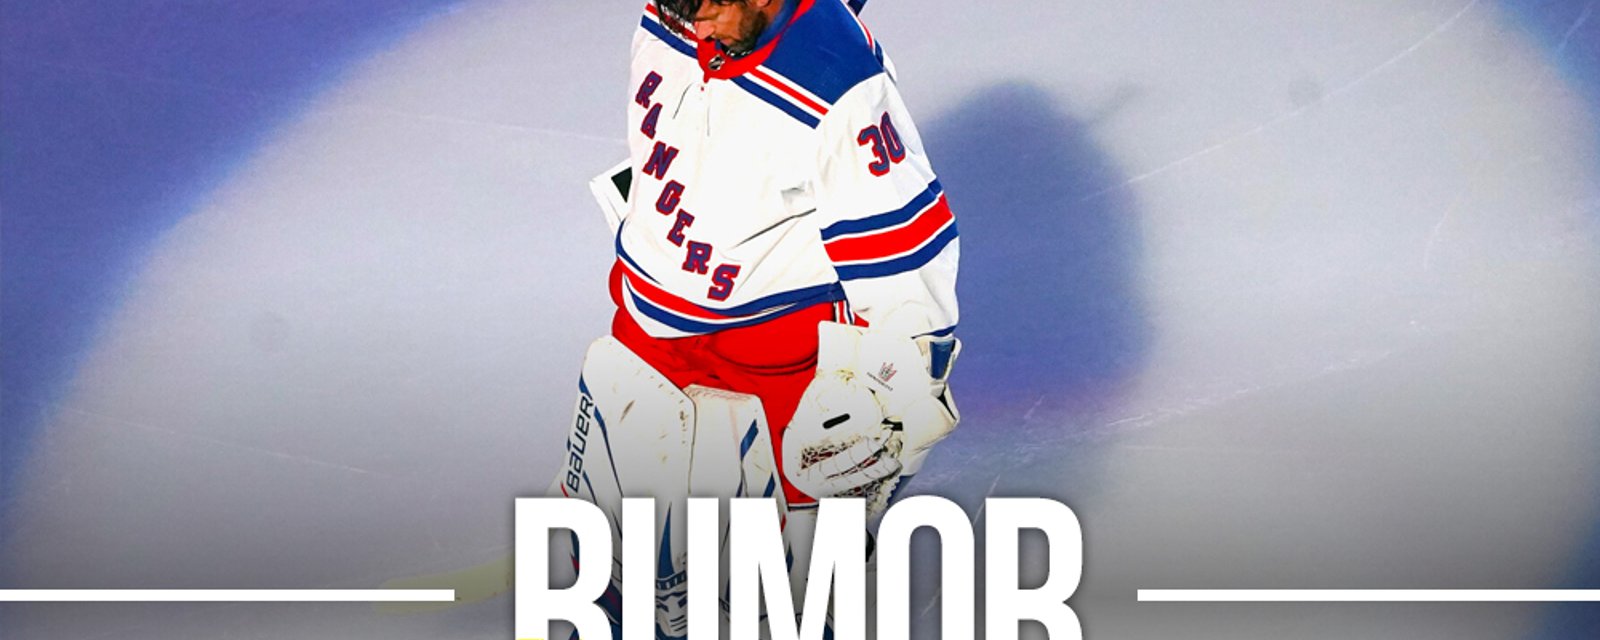 Report: Lundqvist “likely” headed for a buyout